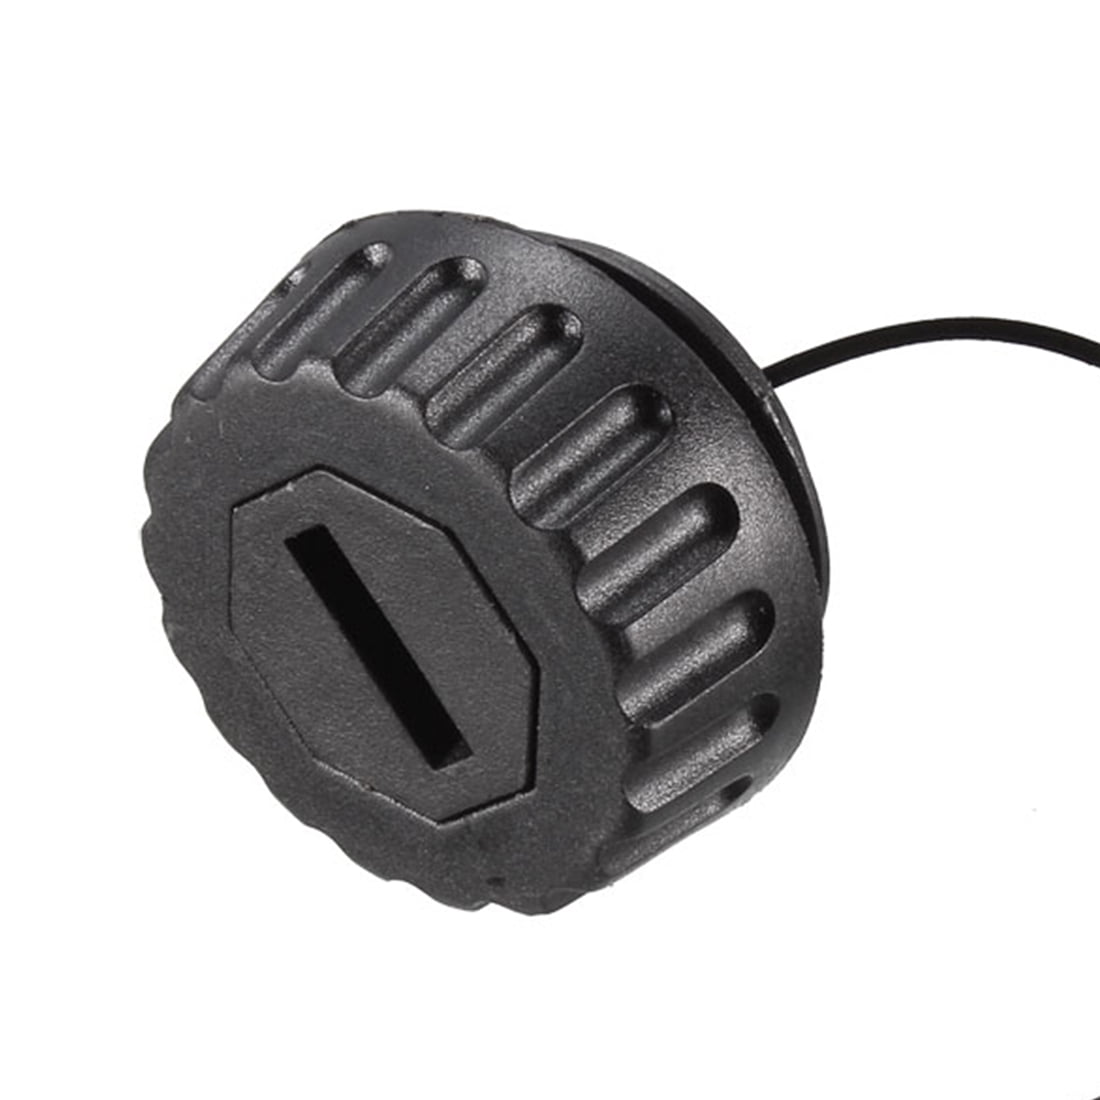 Details about   Oil Cap for STIHL Chainsaw MS290 MS310 MS390 MS640 MS650 MS660 